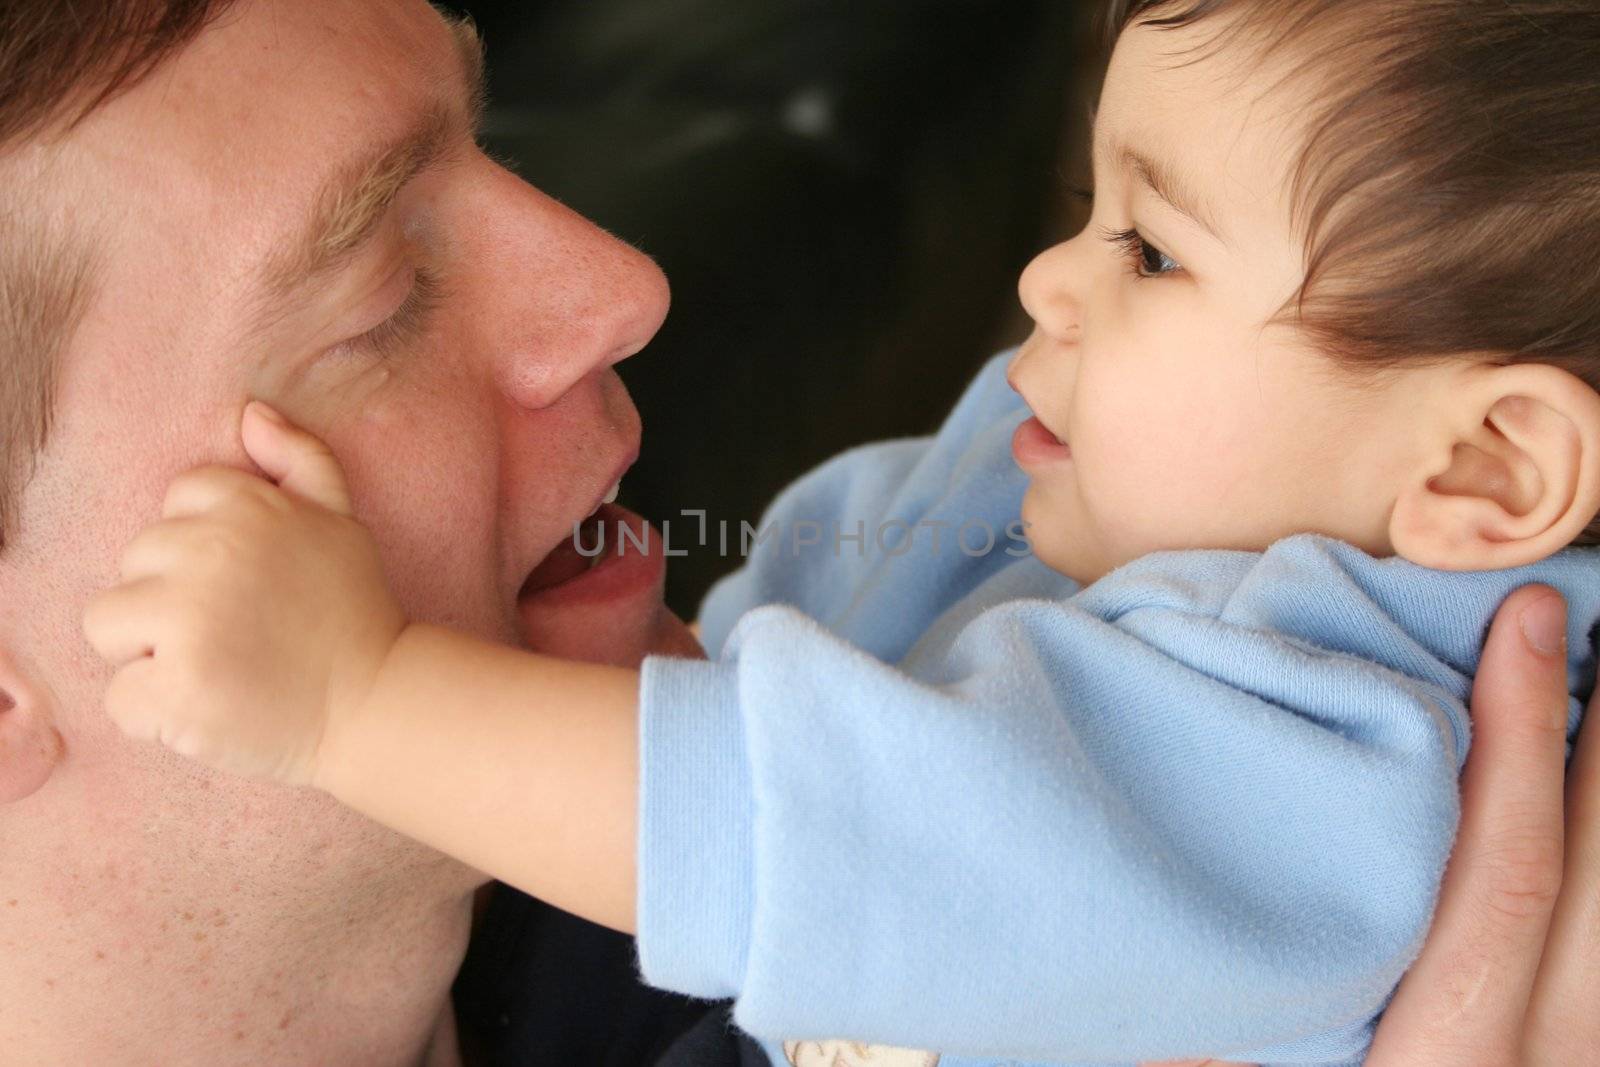 Baby tenderly touching dad's face